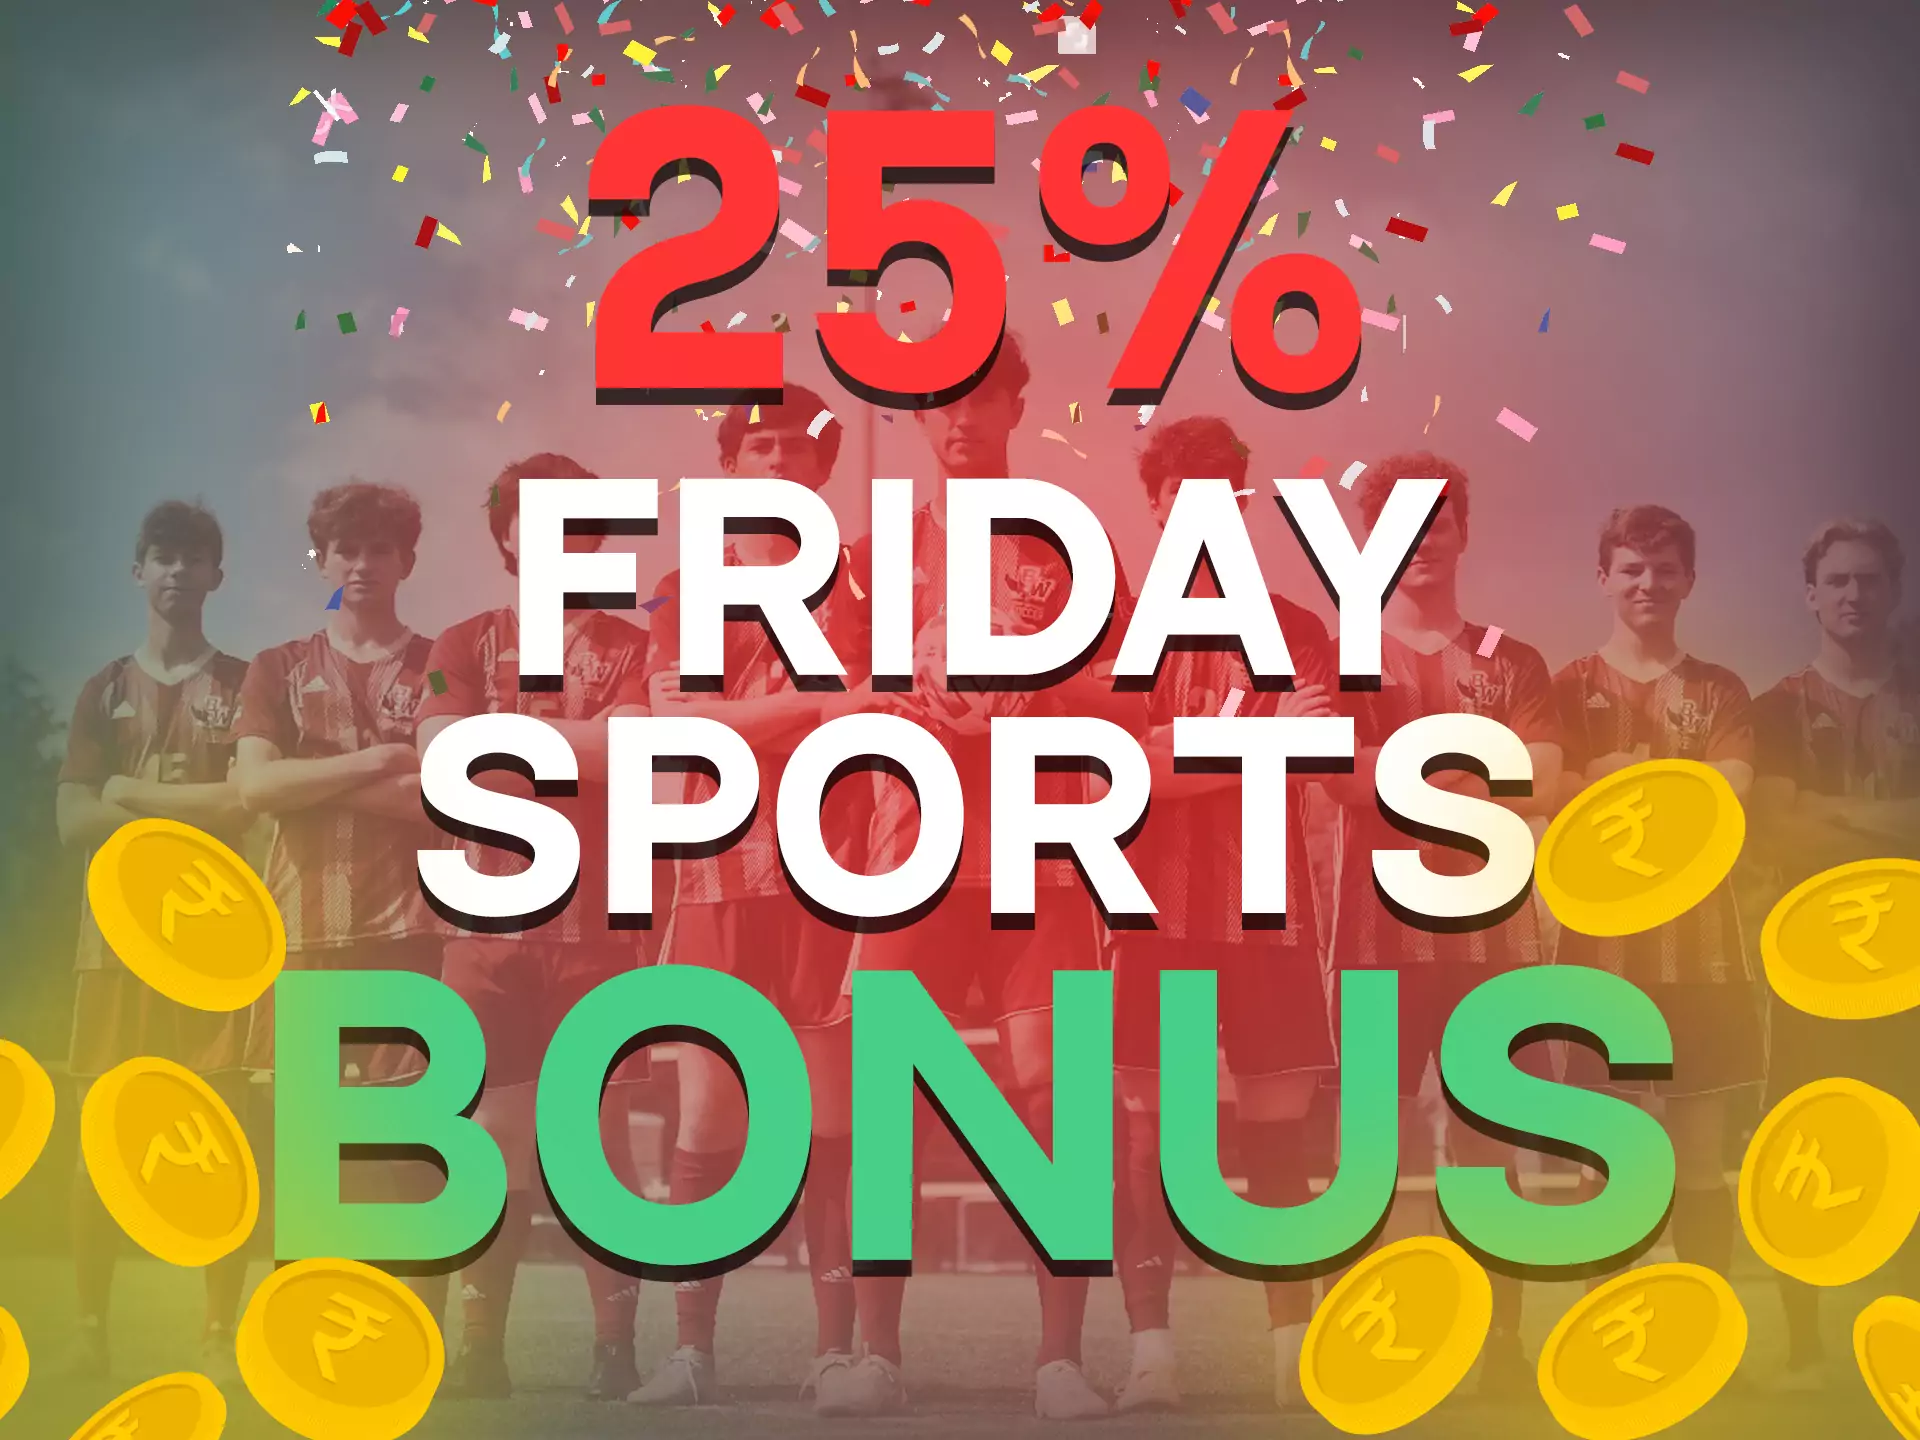 Make a deposit on Friday and get an additional bonus from the bookmaker.